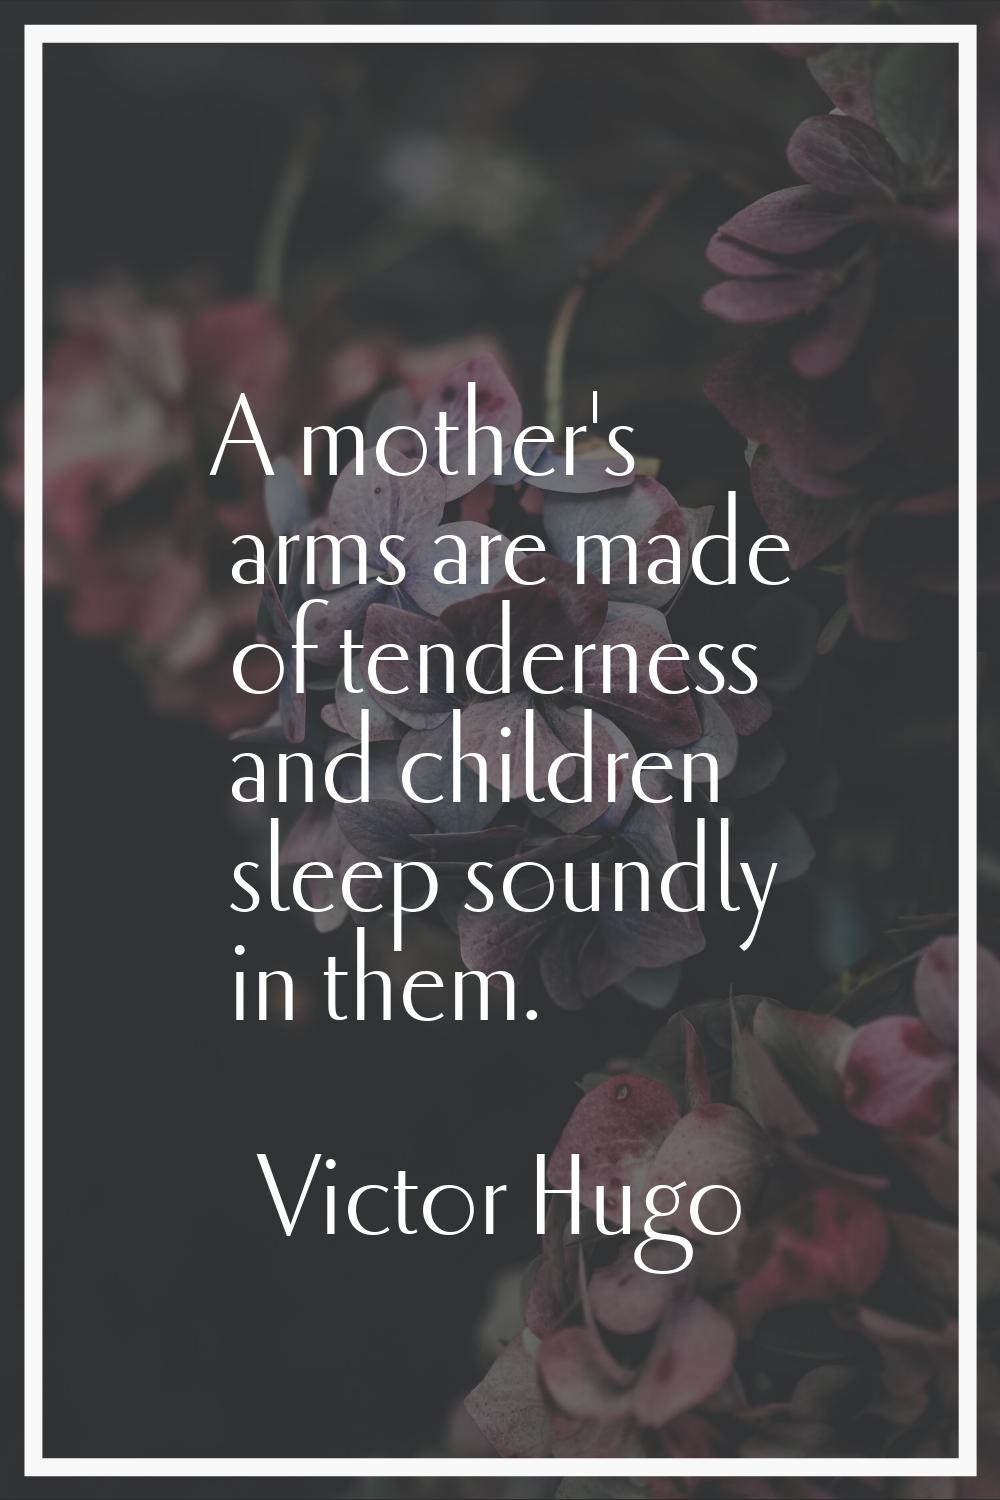 A mother's arms are made of tenderness and children sleep soundly in them.